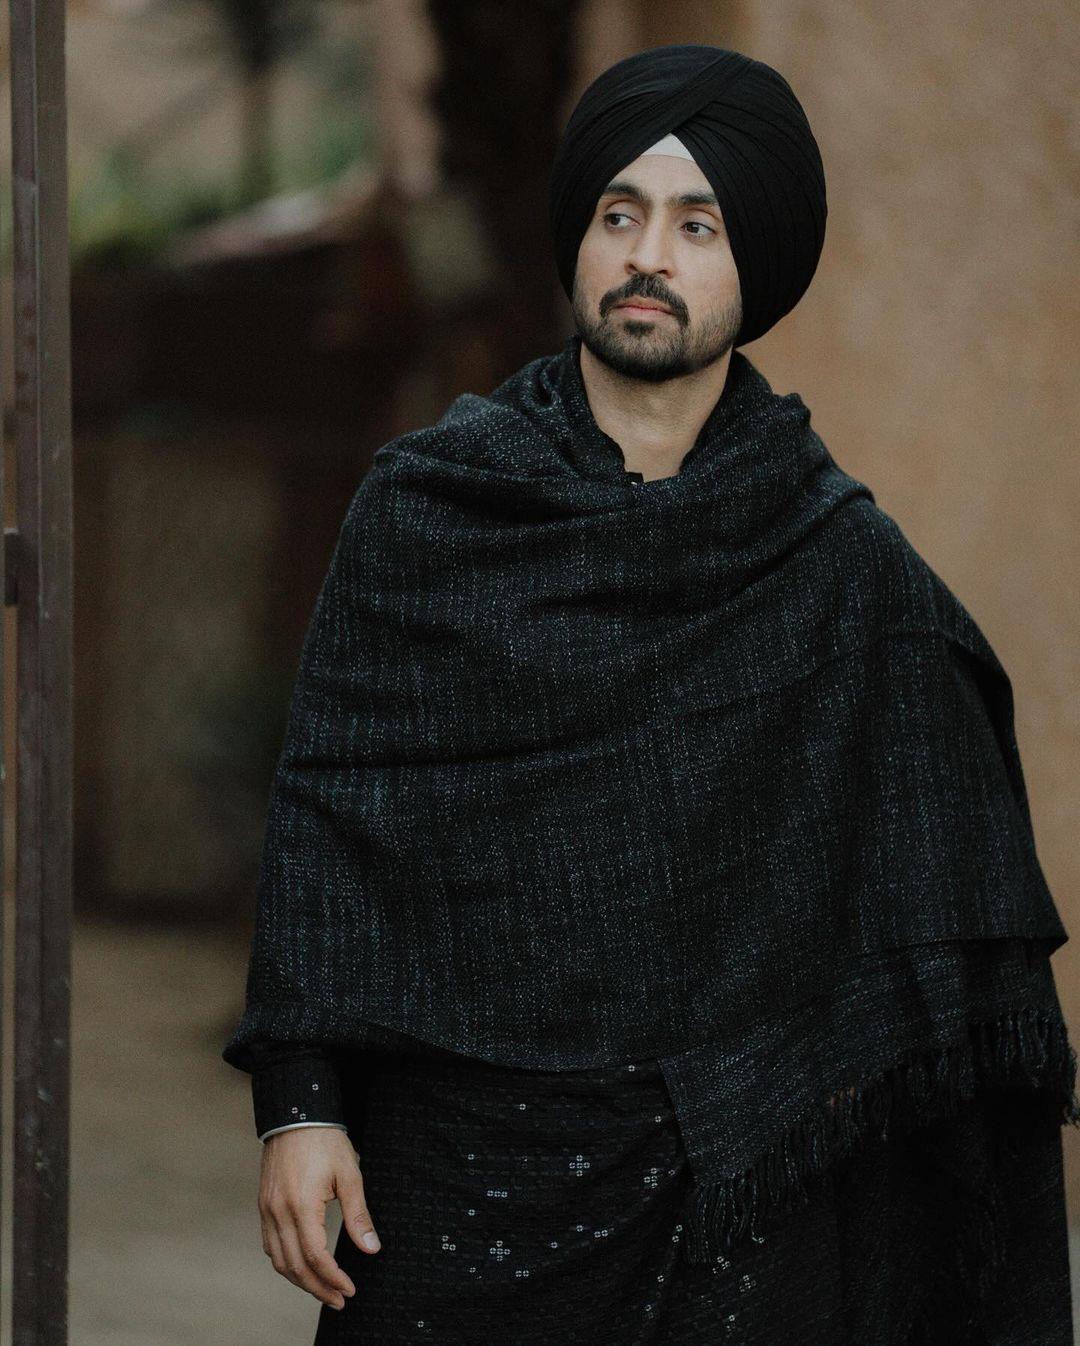 The outfit in itself was simple enough, but the way Diljit Dosanjh manages to pull it off is truly out of this world